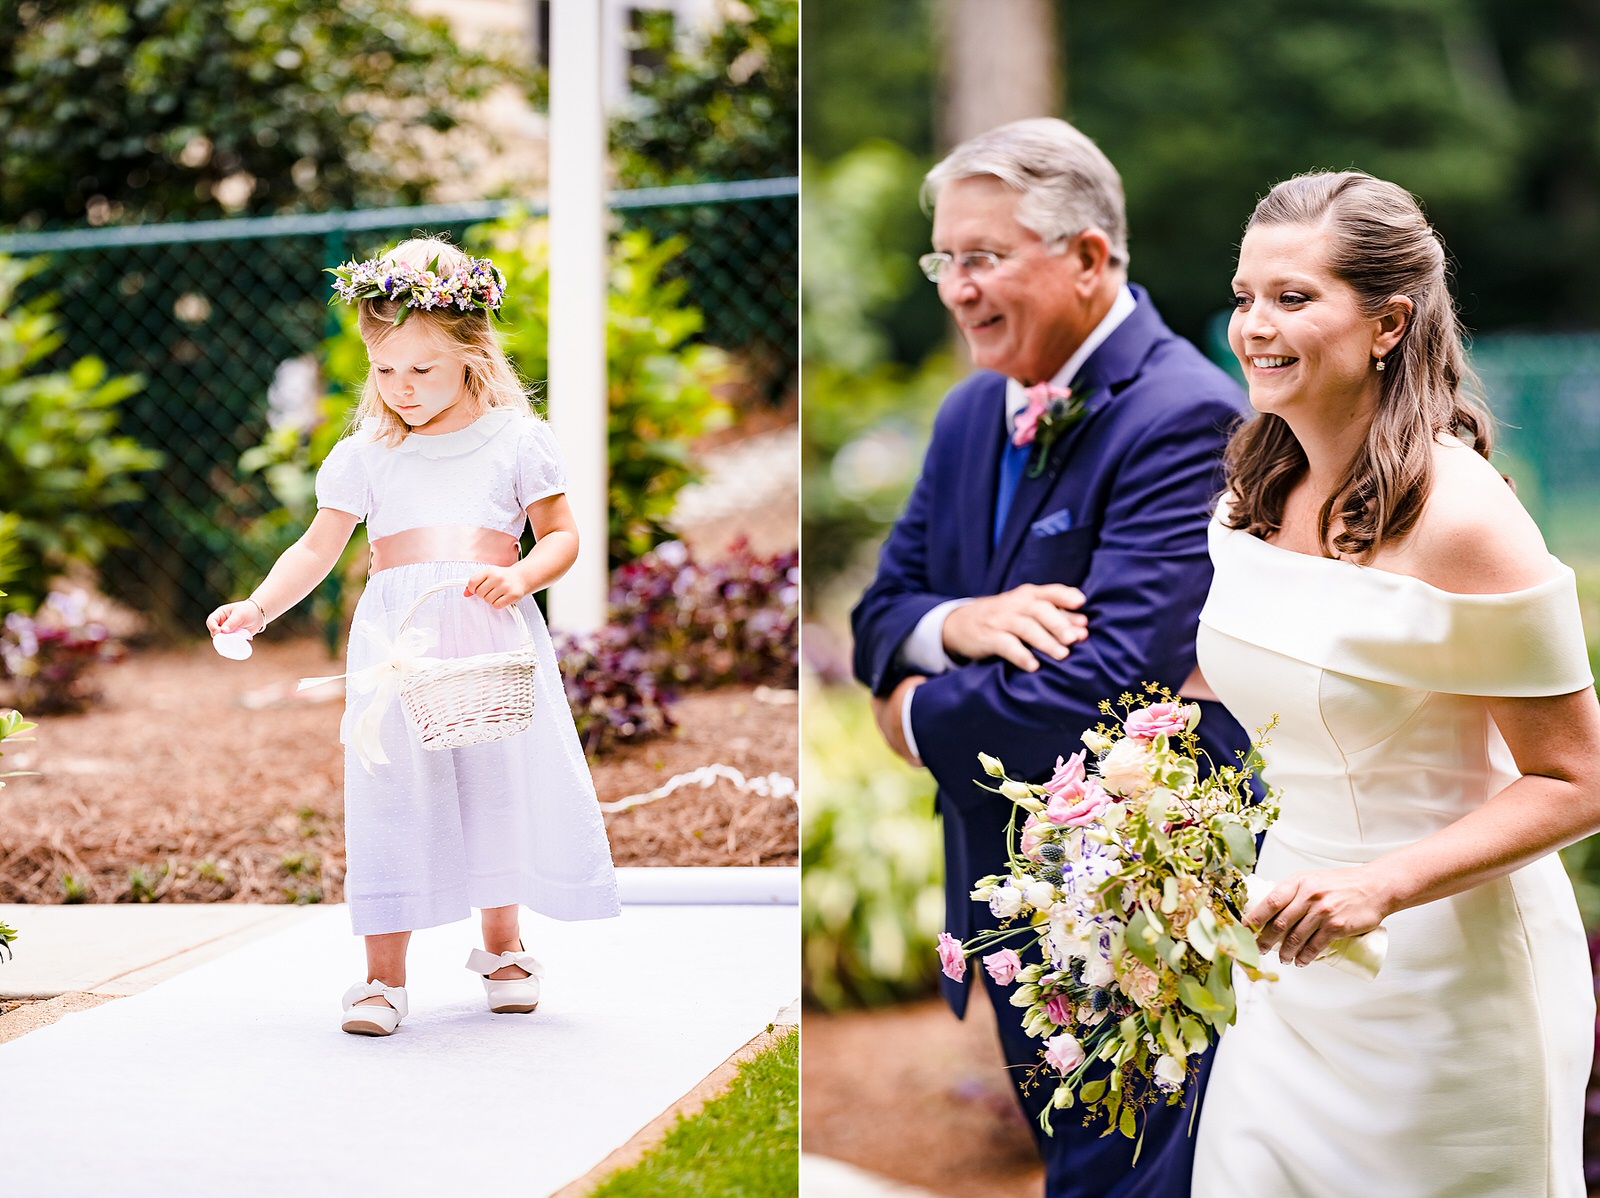 Flower girl walks down the aisle dropping rose petals. She is followed by the bride and the father of the bride